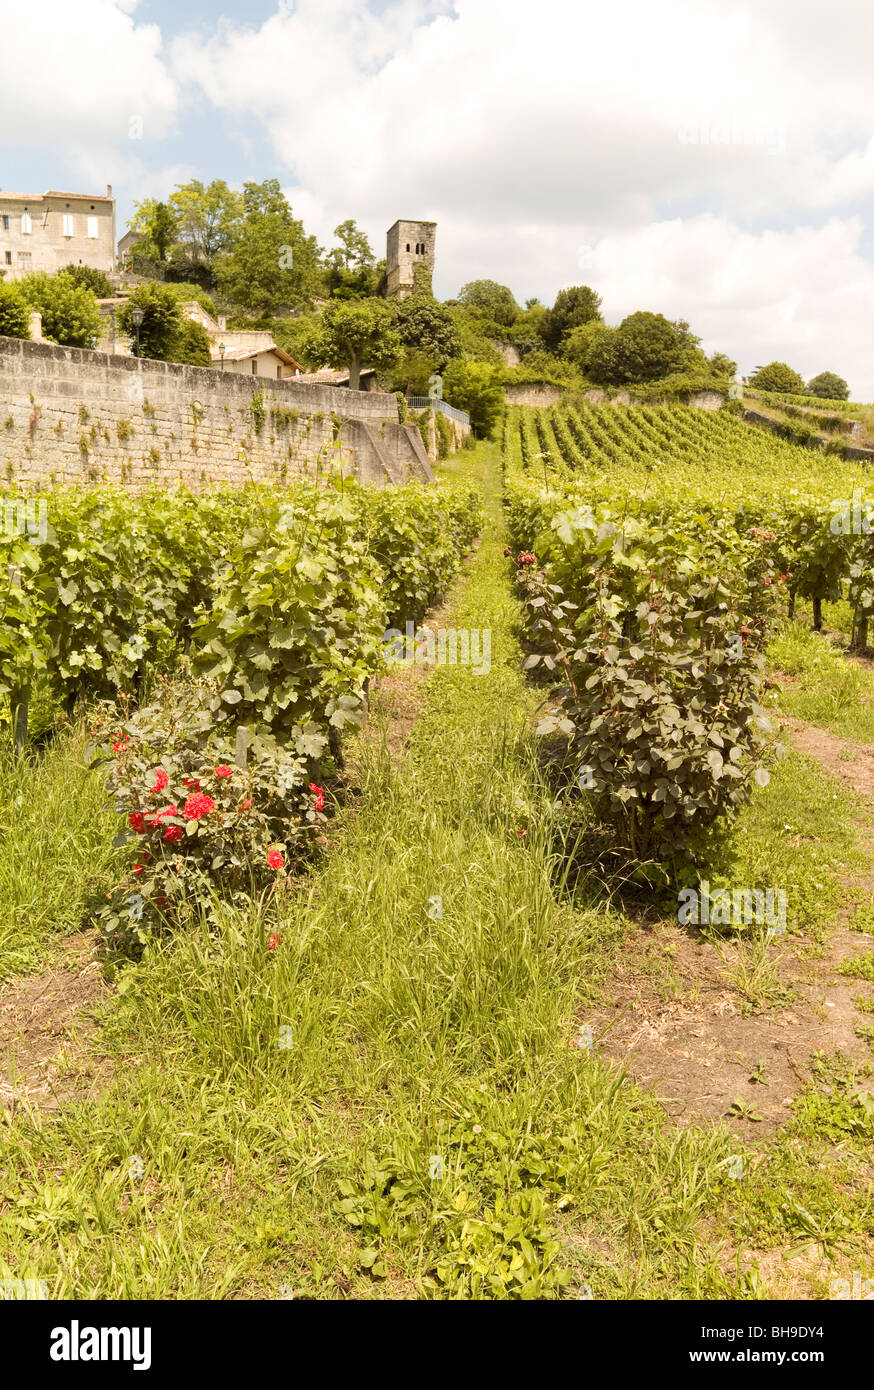 A hillside vineyard, just outside the ancient town of St Emilion, Gironde, Nouvelle-Aquitaine, France, Europe in summertime Stock Photo